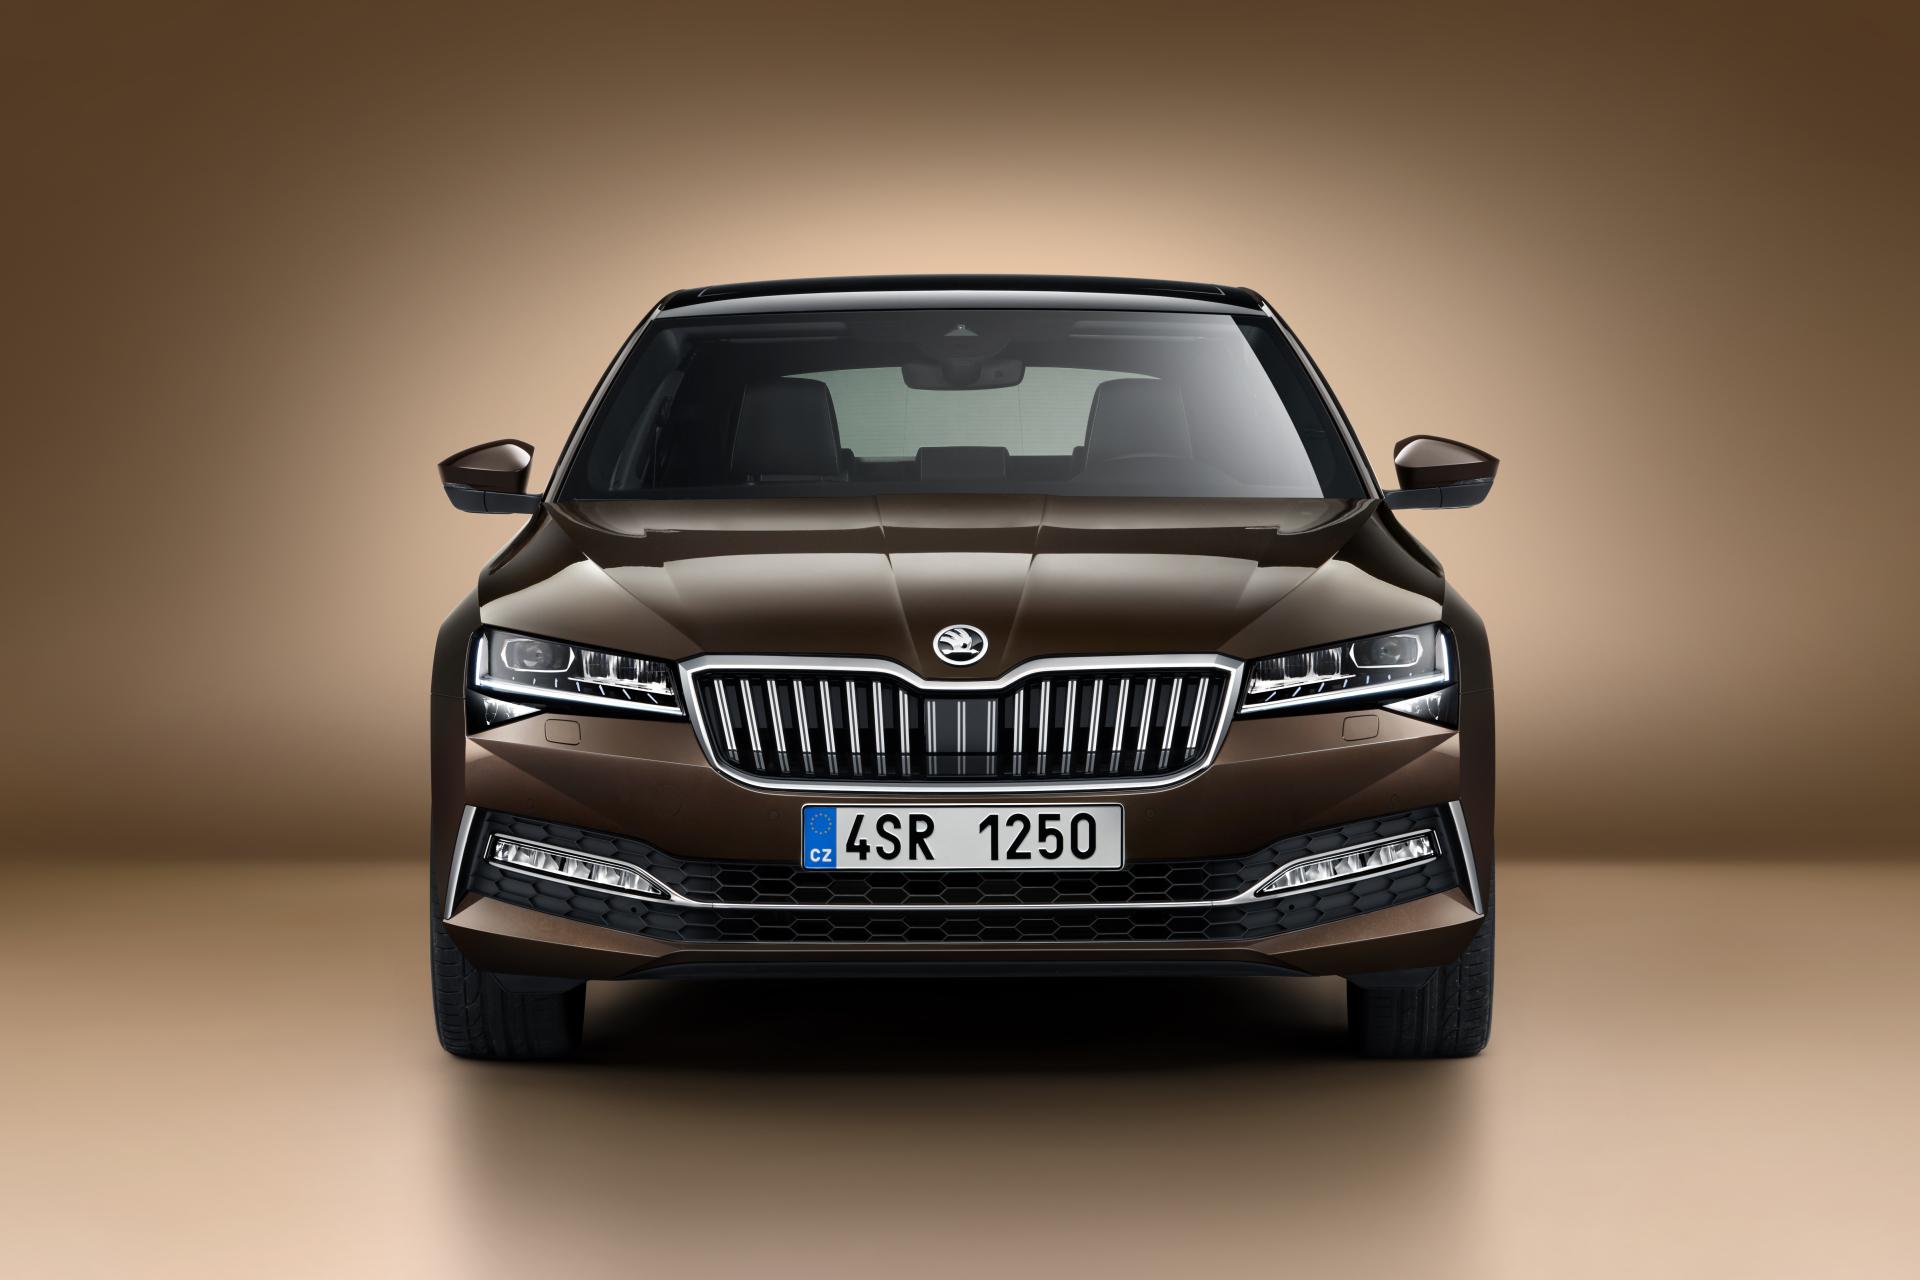 The New Skoda Superb Debuts The Lifting 2020 Brought Electrification And Many Changes Photos